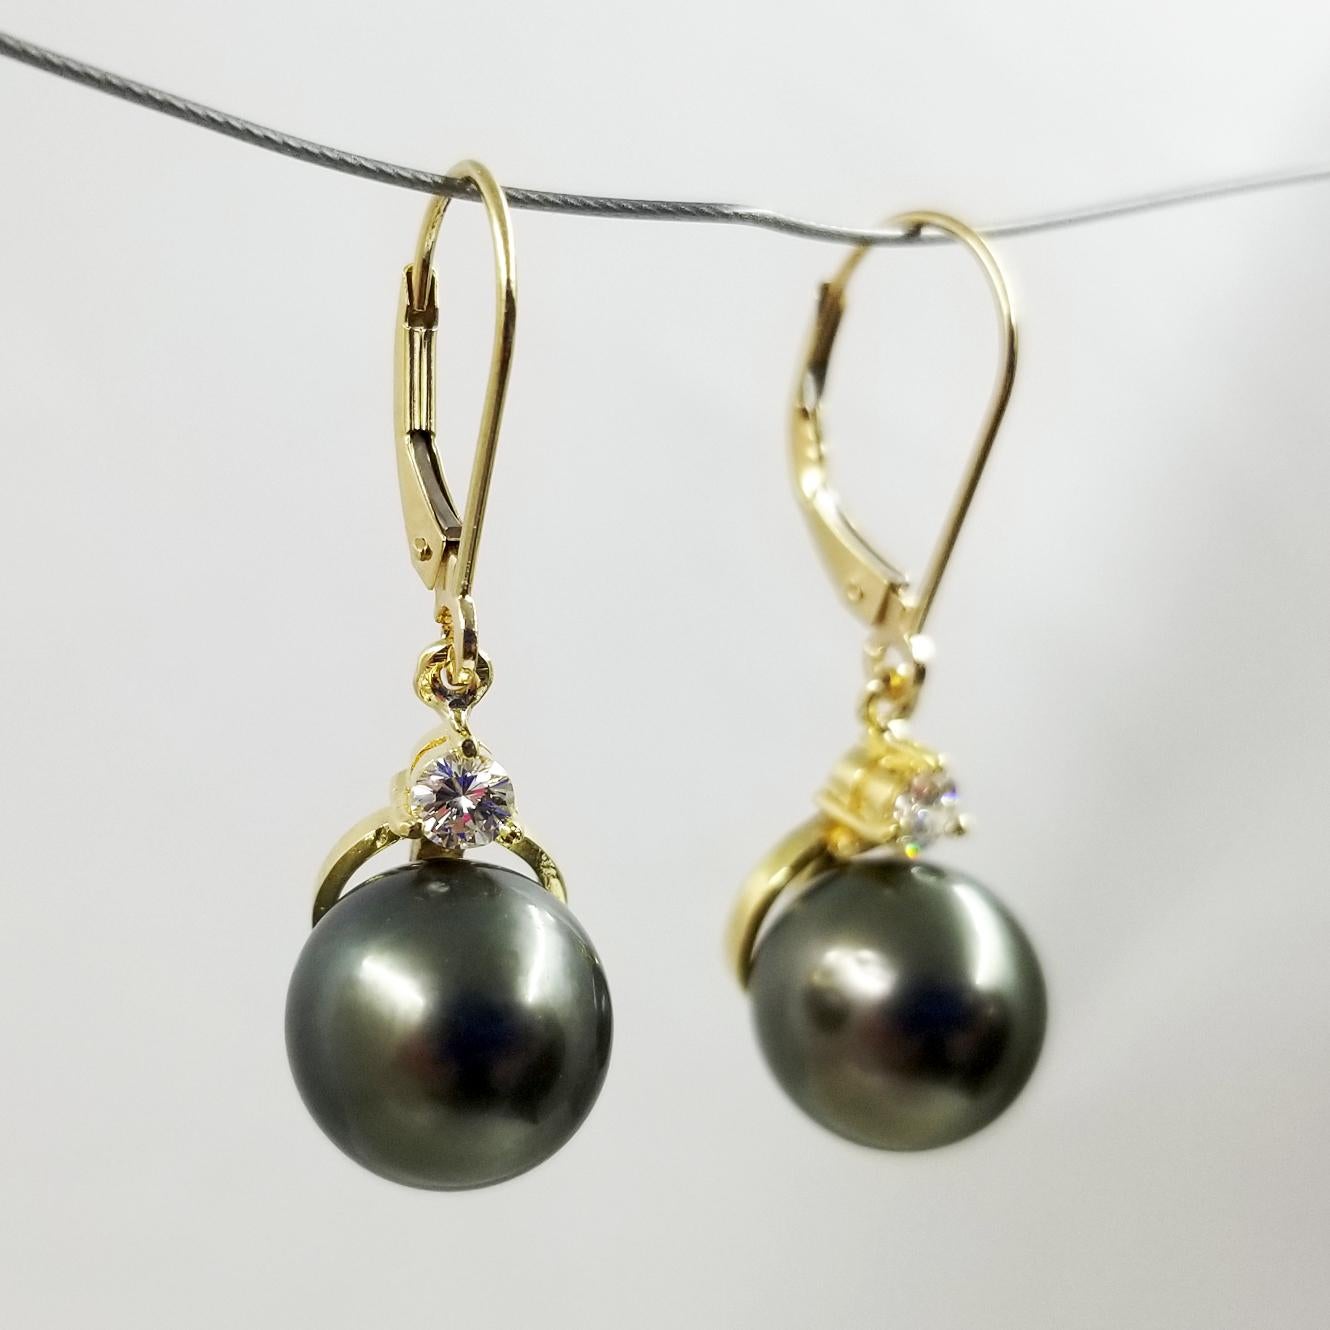 18 Karat Yellow Gold Tahitian South Sea Pearl Drop Earrings. 2 Gray Cultured Pearls Measure 10.4mm. 2 Diamonds Total 0.26 Carat. Finished Weight is 5.5 Grams.